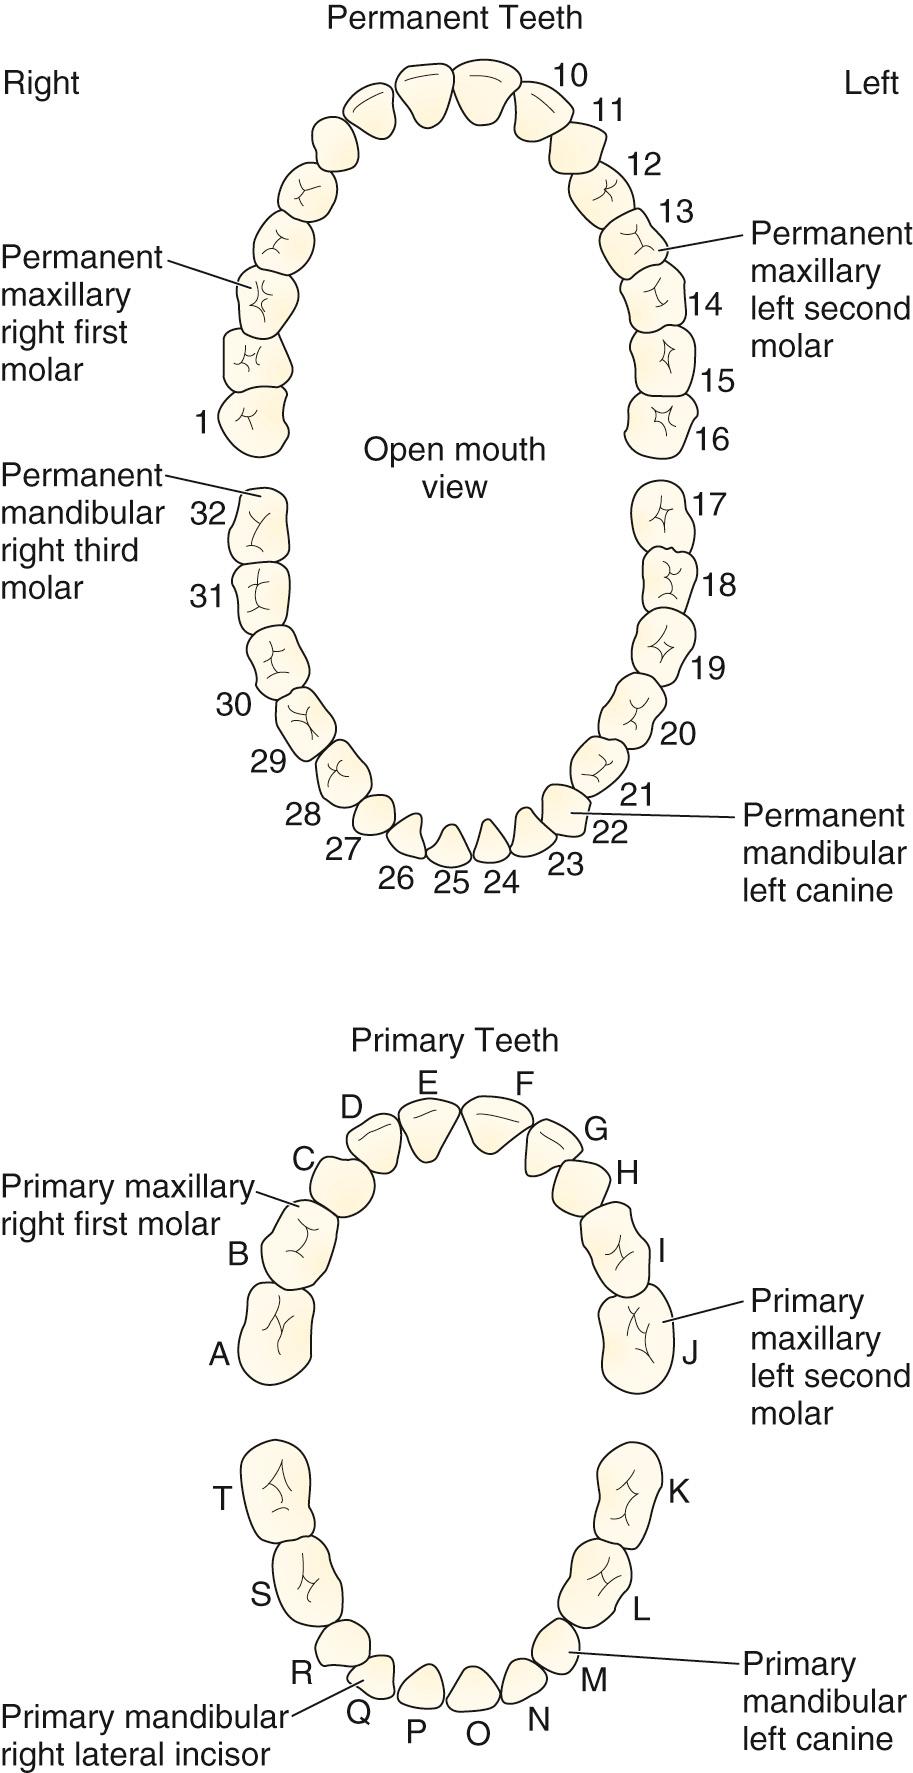 Figure 64.2, Identification of teeth, adult and child. Each tooth has a number assigned to it. By 14 years of age, all primary teeth should normally be lost. Do not reimplant an avulsed primary tooth; rather, refer to a dentist to prevent future misalignment of the permanent teeth.